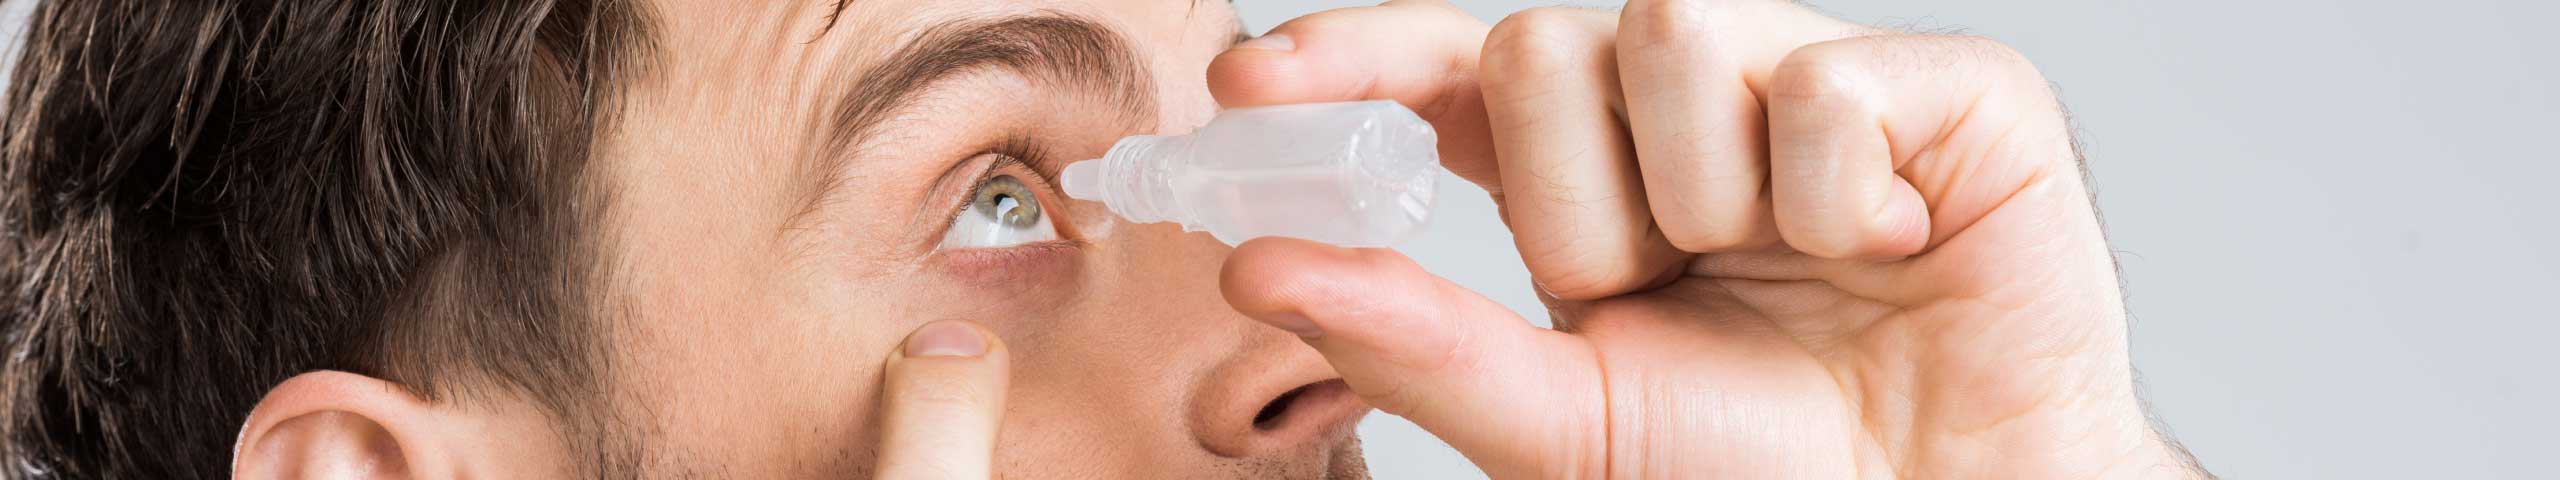 Eye drops - all you need to know.